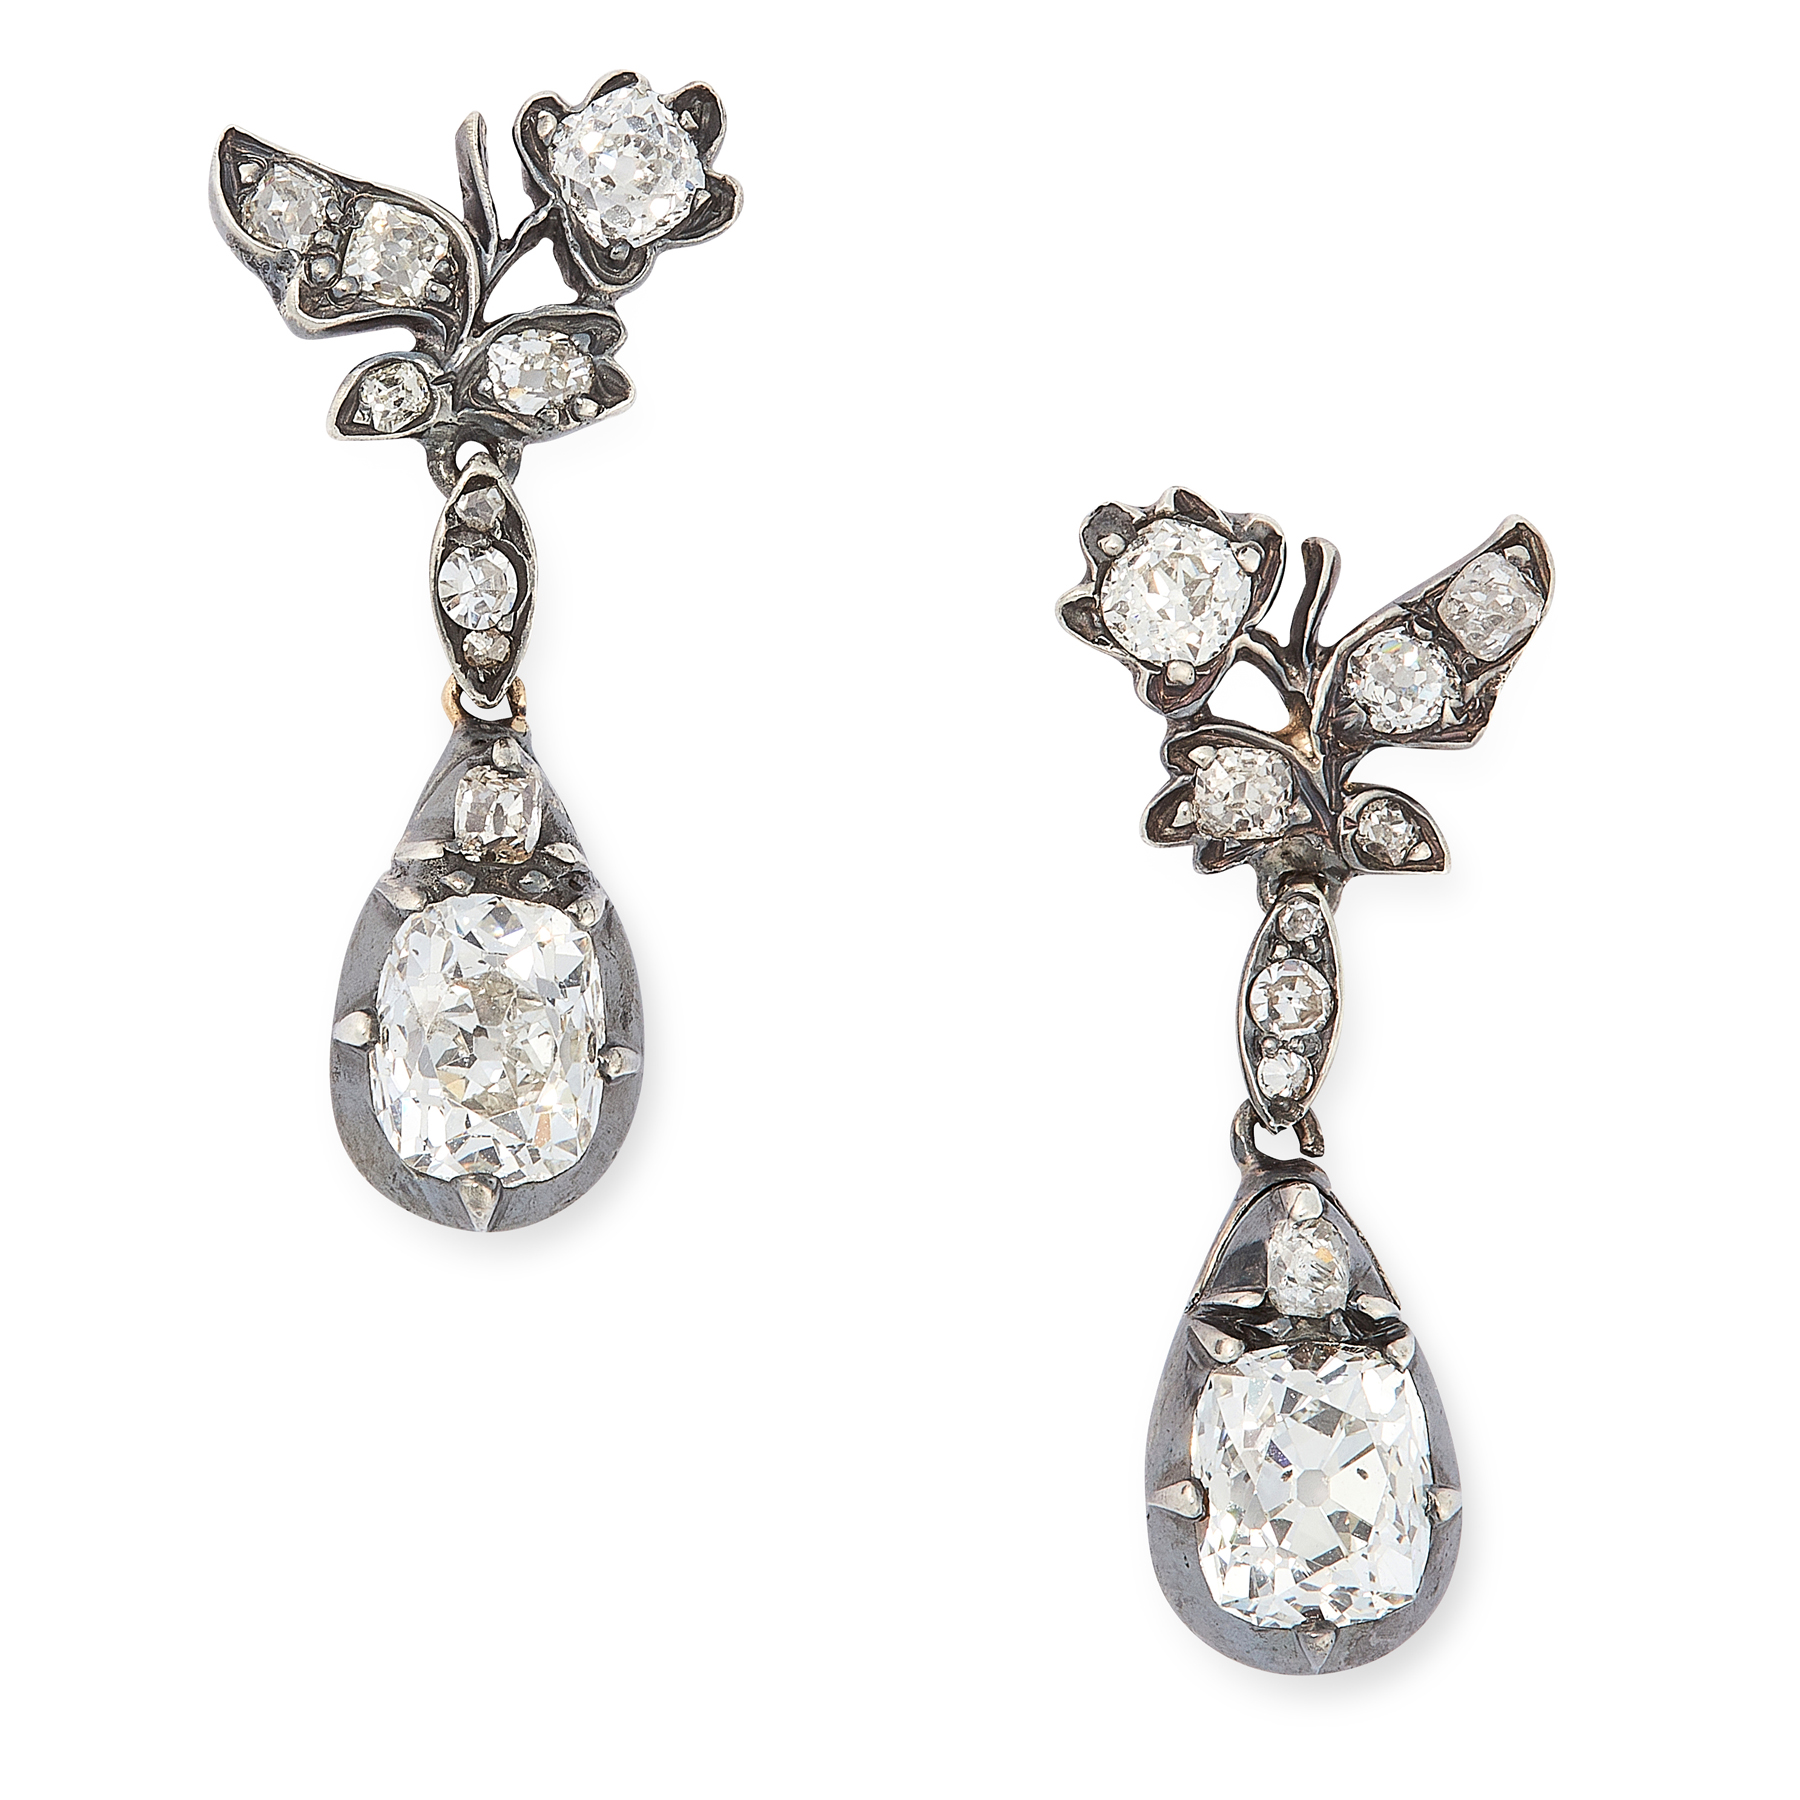 A PAIR OF ANTIQUE DIAMOND DROP EARRINGS, 19TH CENTURY in yellow gold and silver, set with